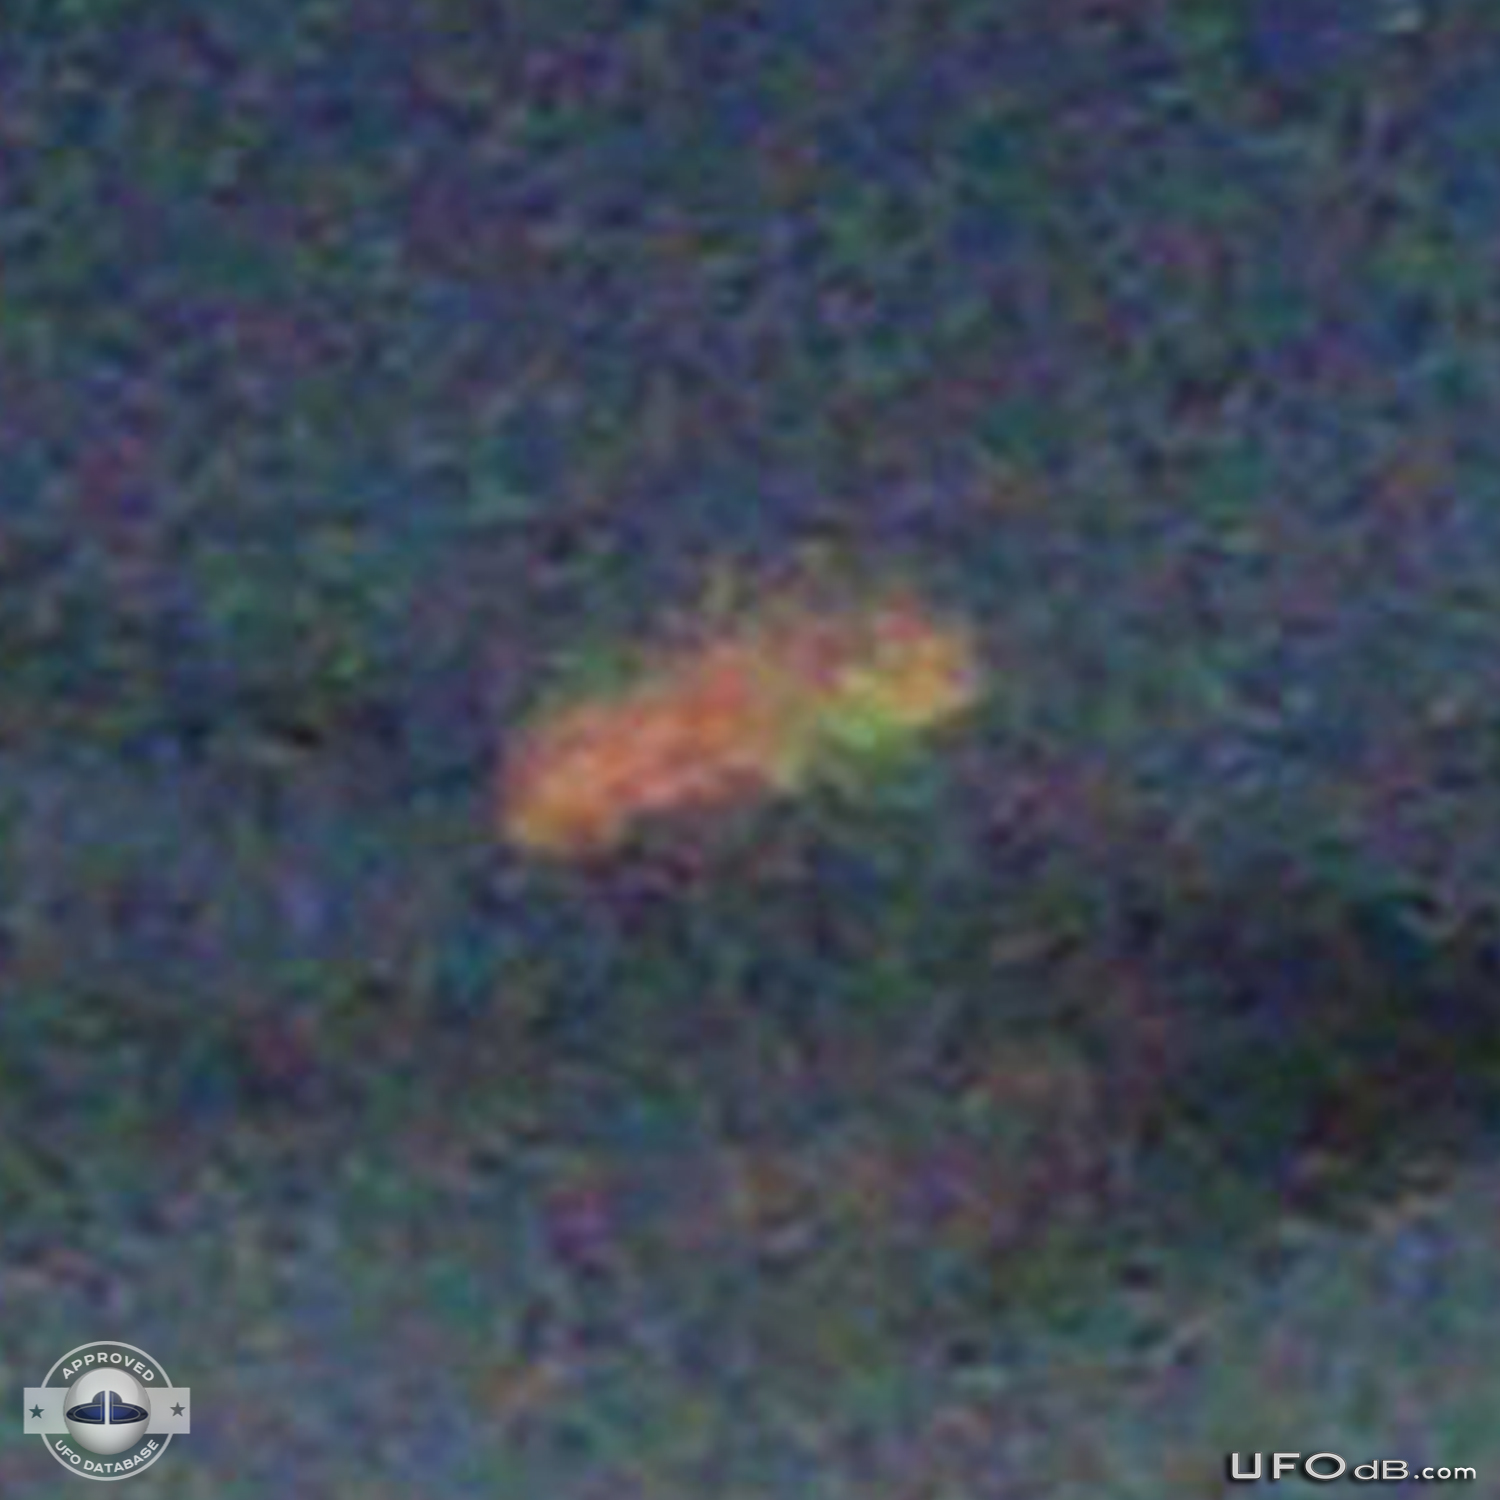 Canada Northwest Territories UFO picture | Yellowknife | May 14 2011 UFO Picture #296-4